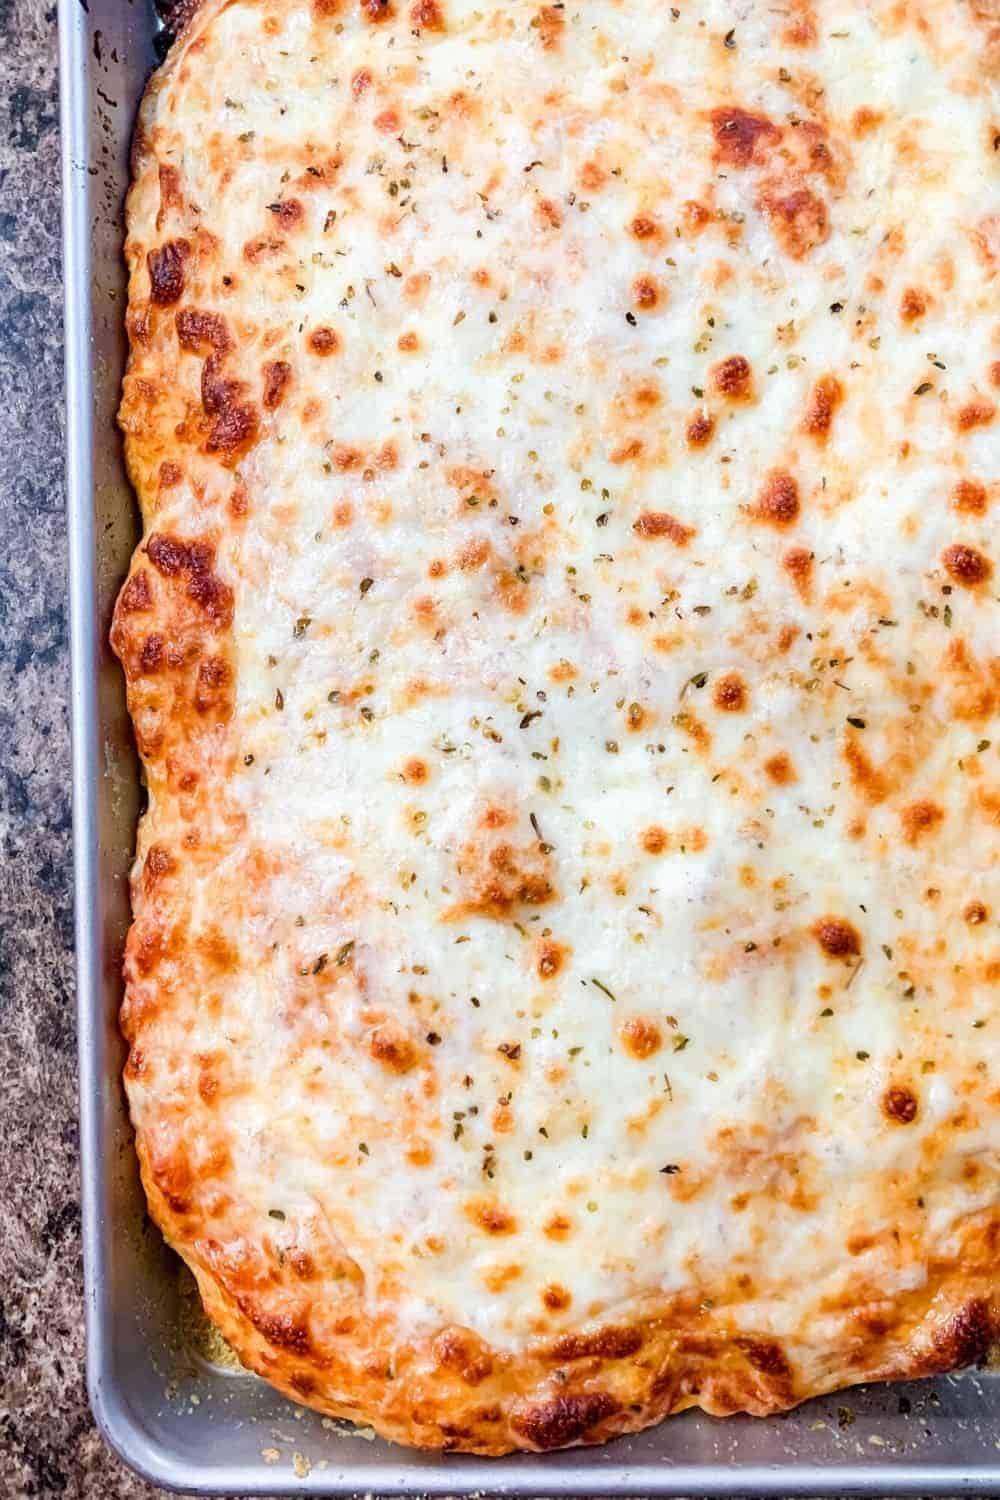 Overhead view of a whole rectangle pizza reminiscent of old-school cafeteria pizza 